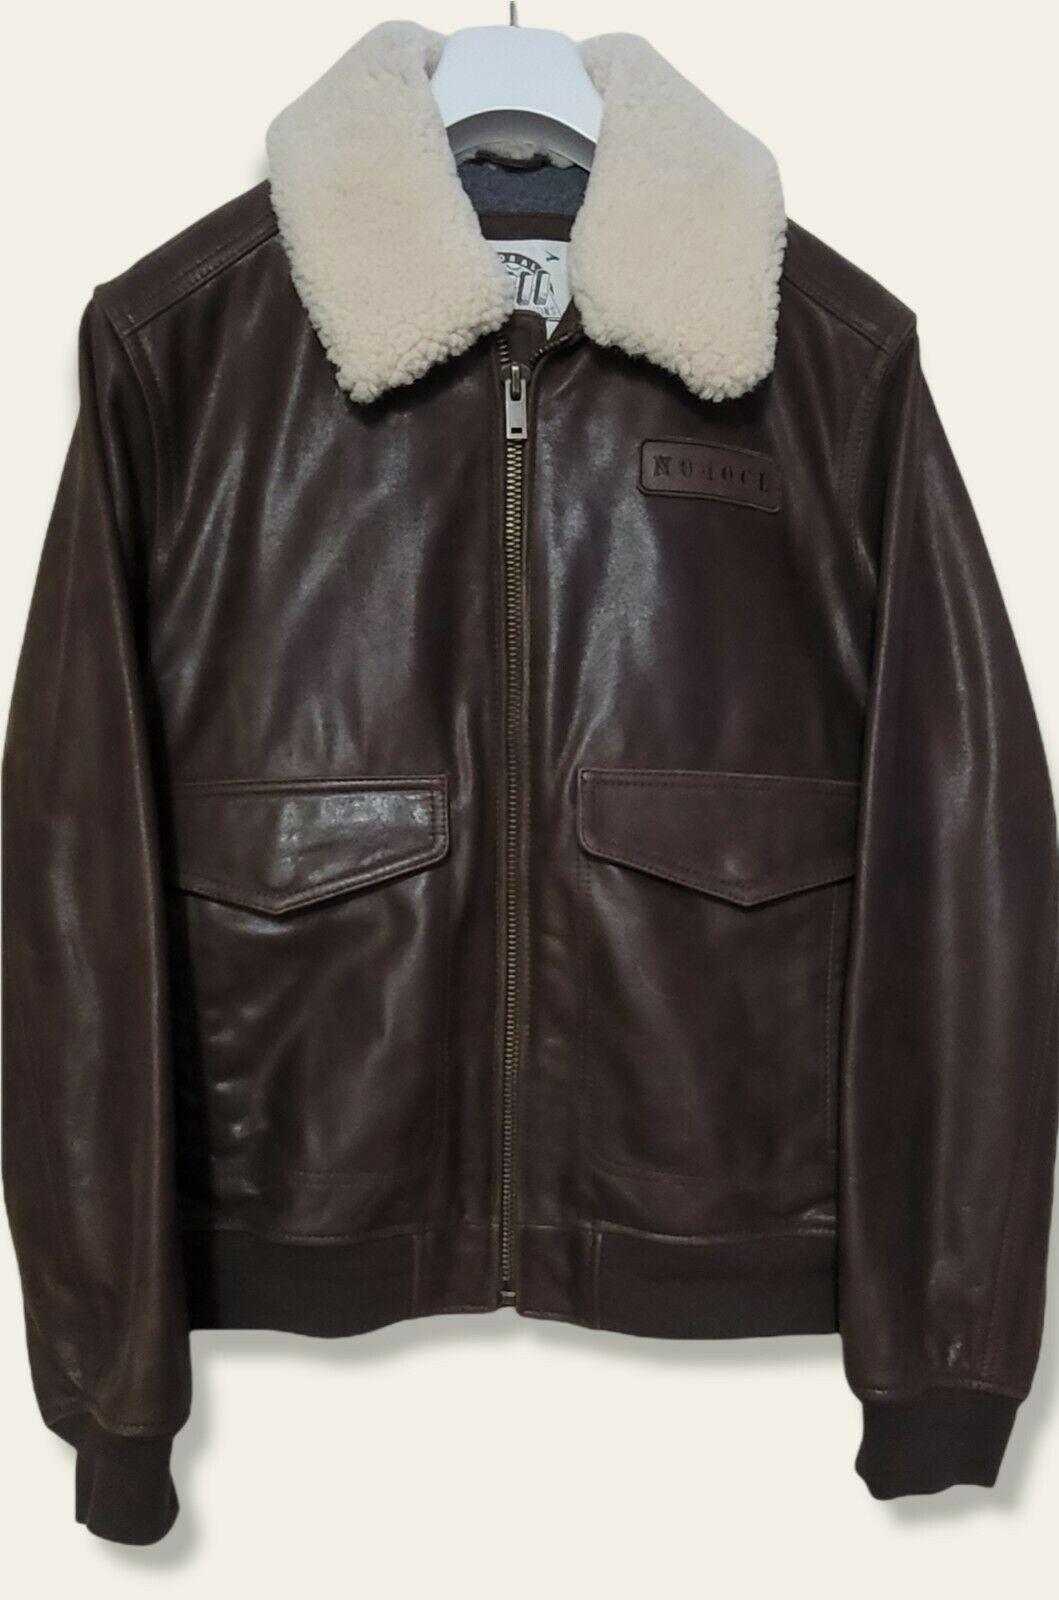 G-III Global Identity Bomber Leather Jacket Detachable Shearling Collar Brown M - SVNYFancy